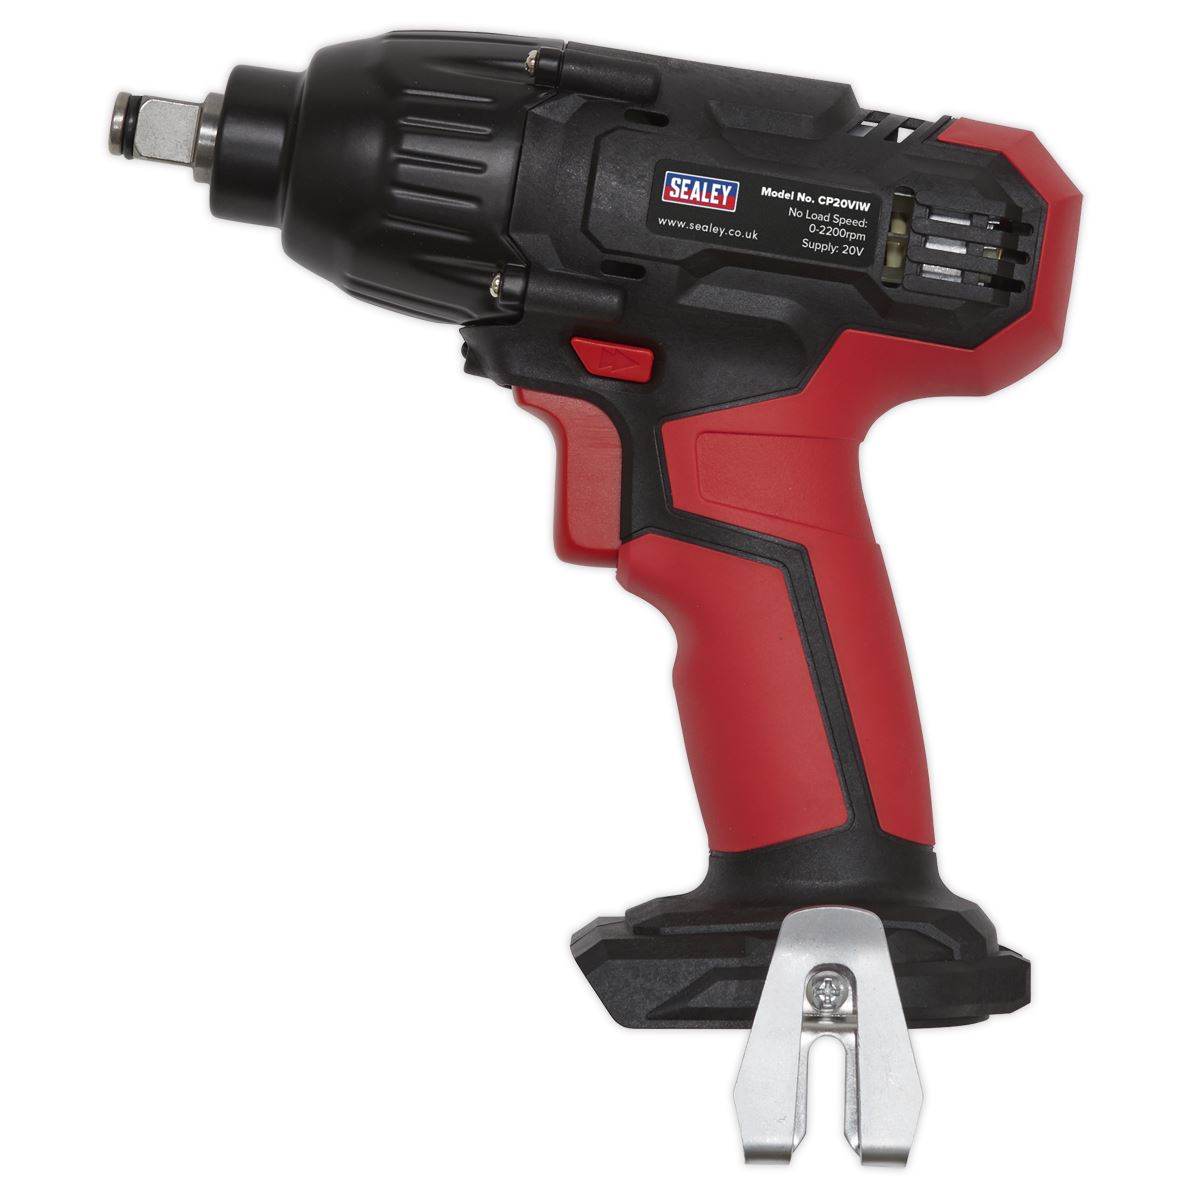 Sealey Impact Wrench 20V SV20 Series 1/2"Sq Drive - Body Only